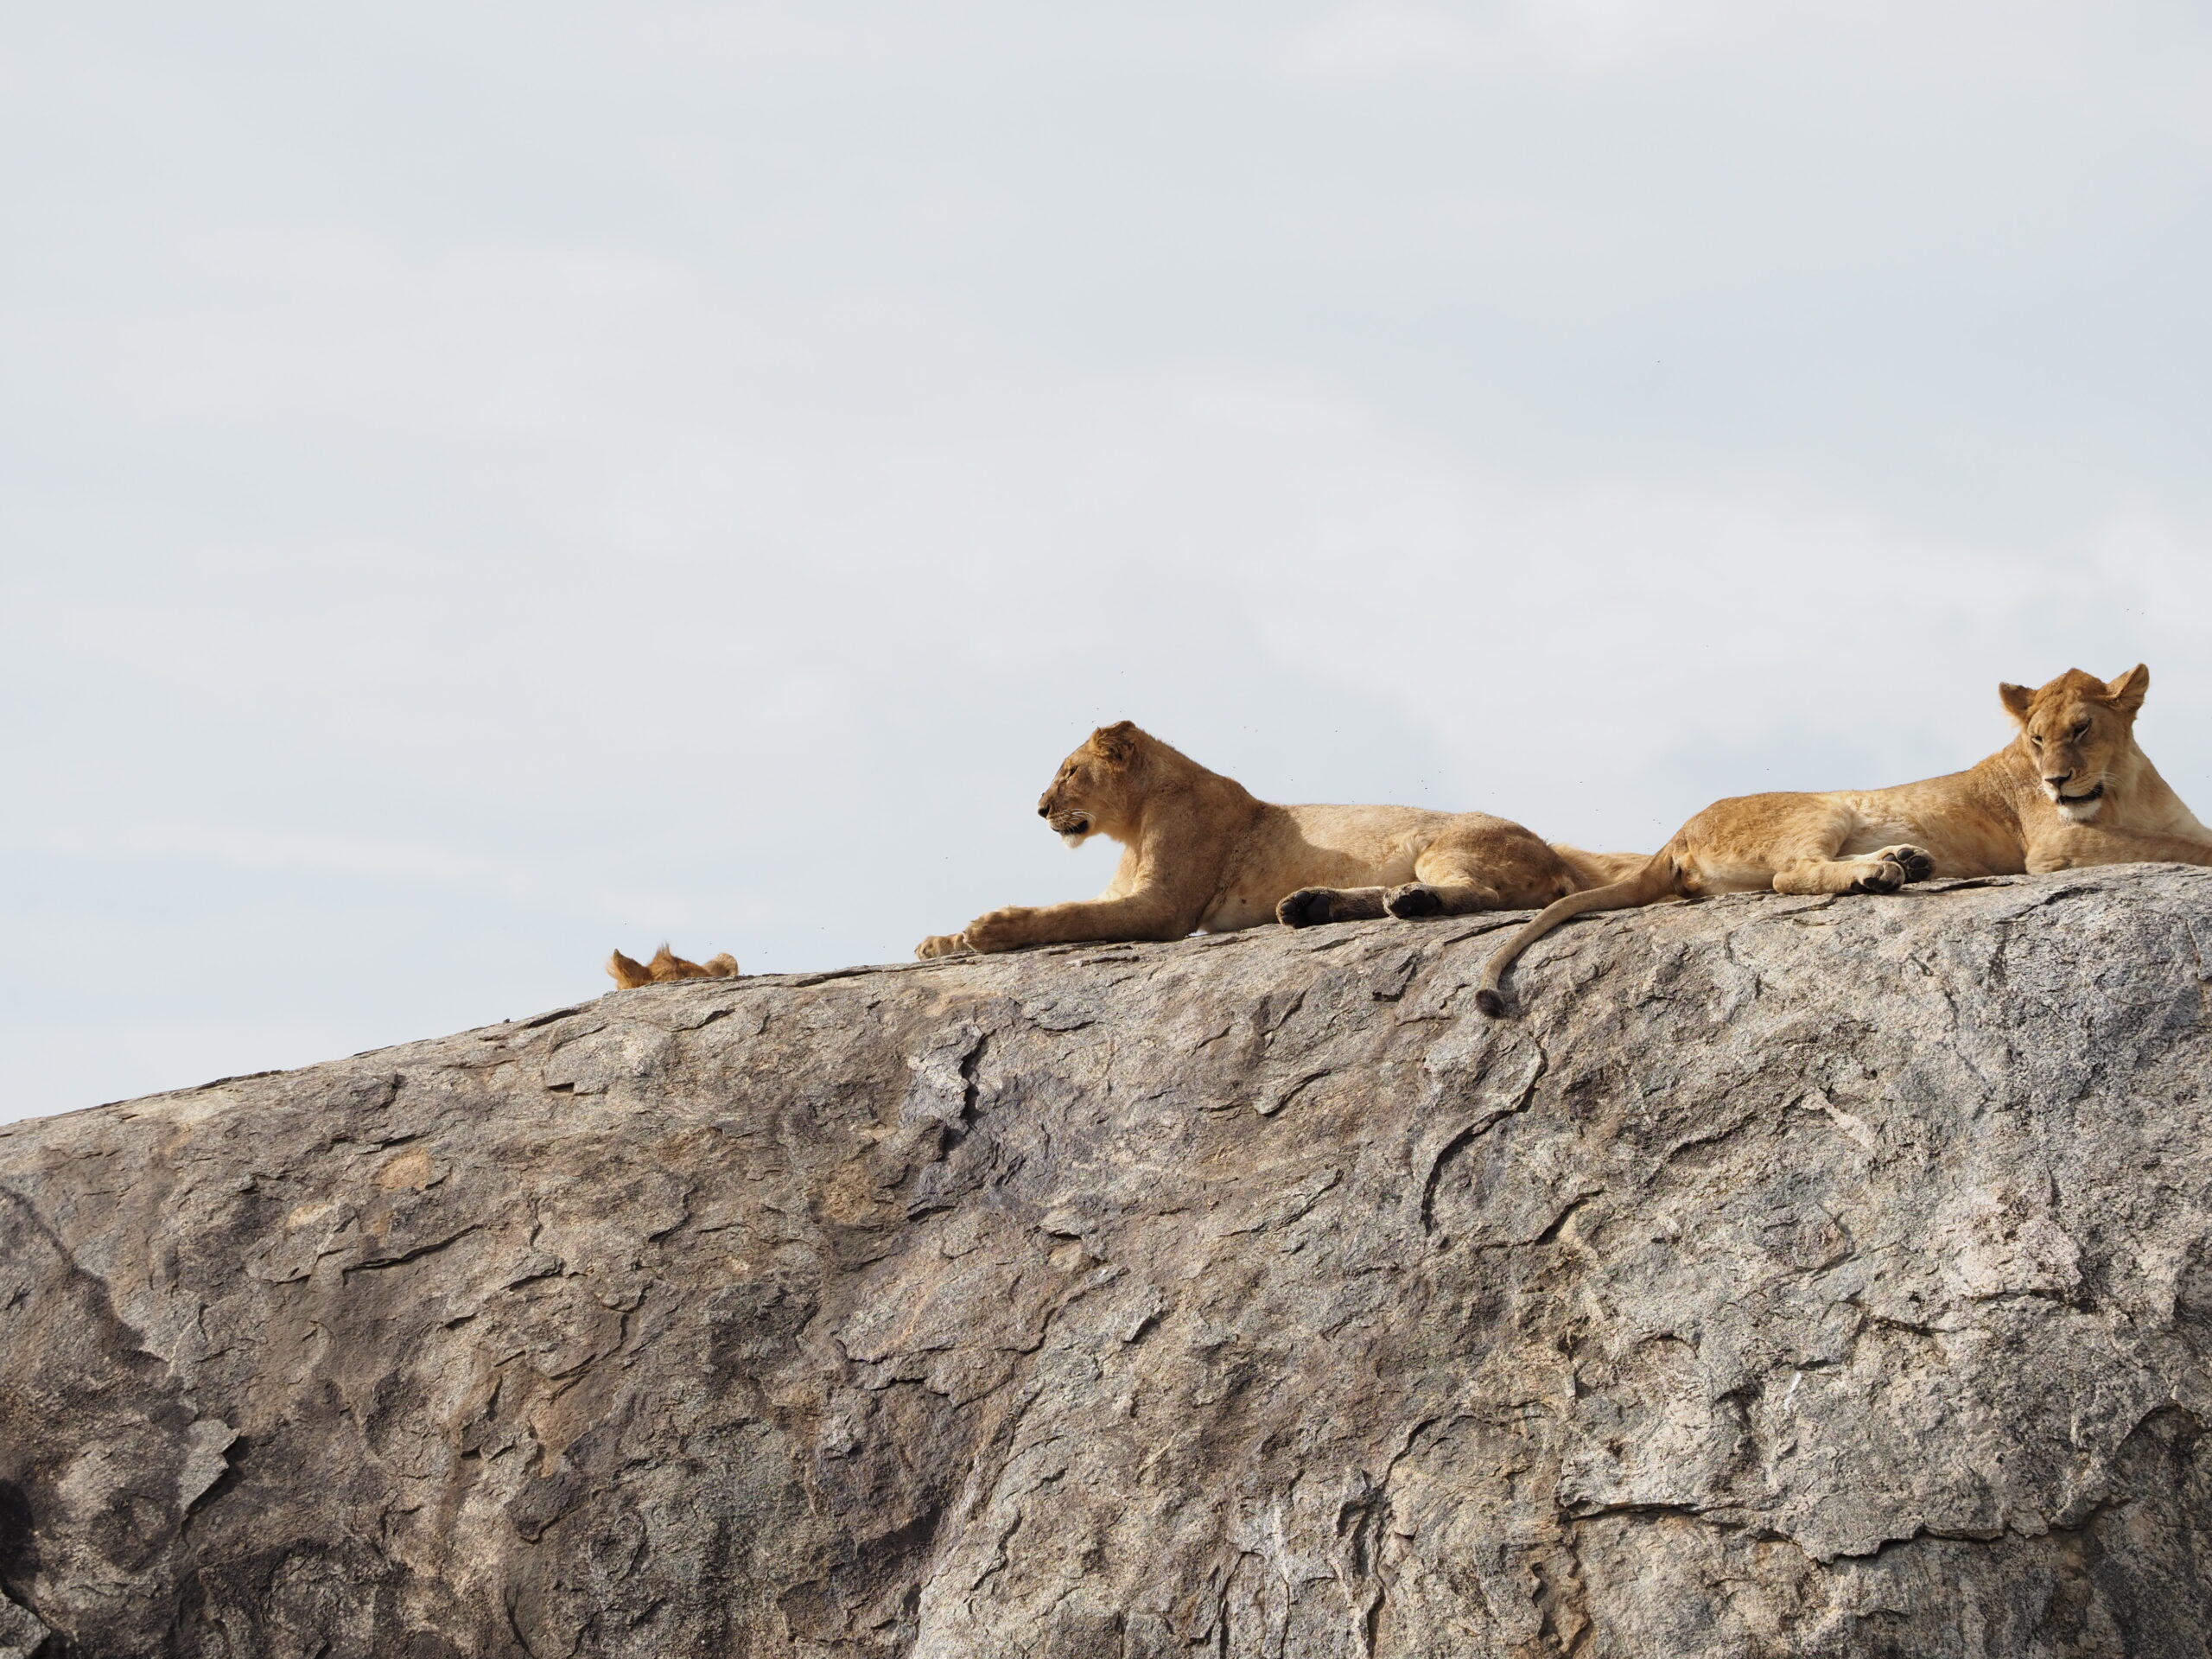 Lions in Serengeti National Park